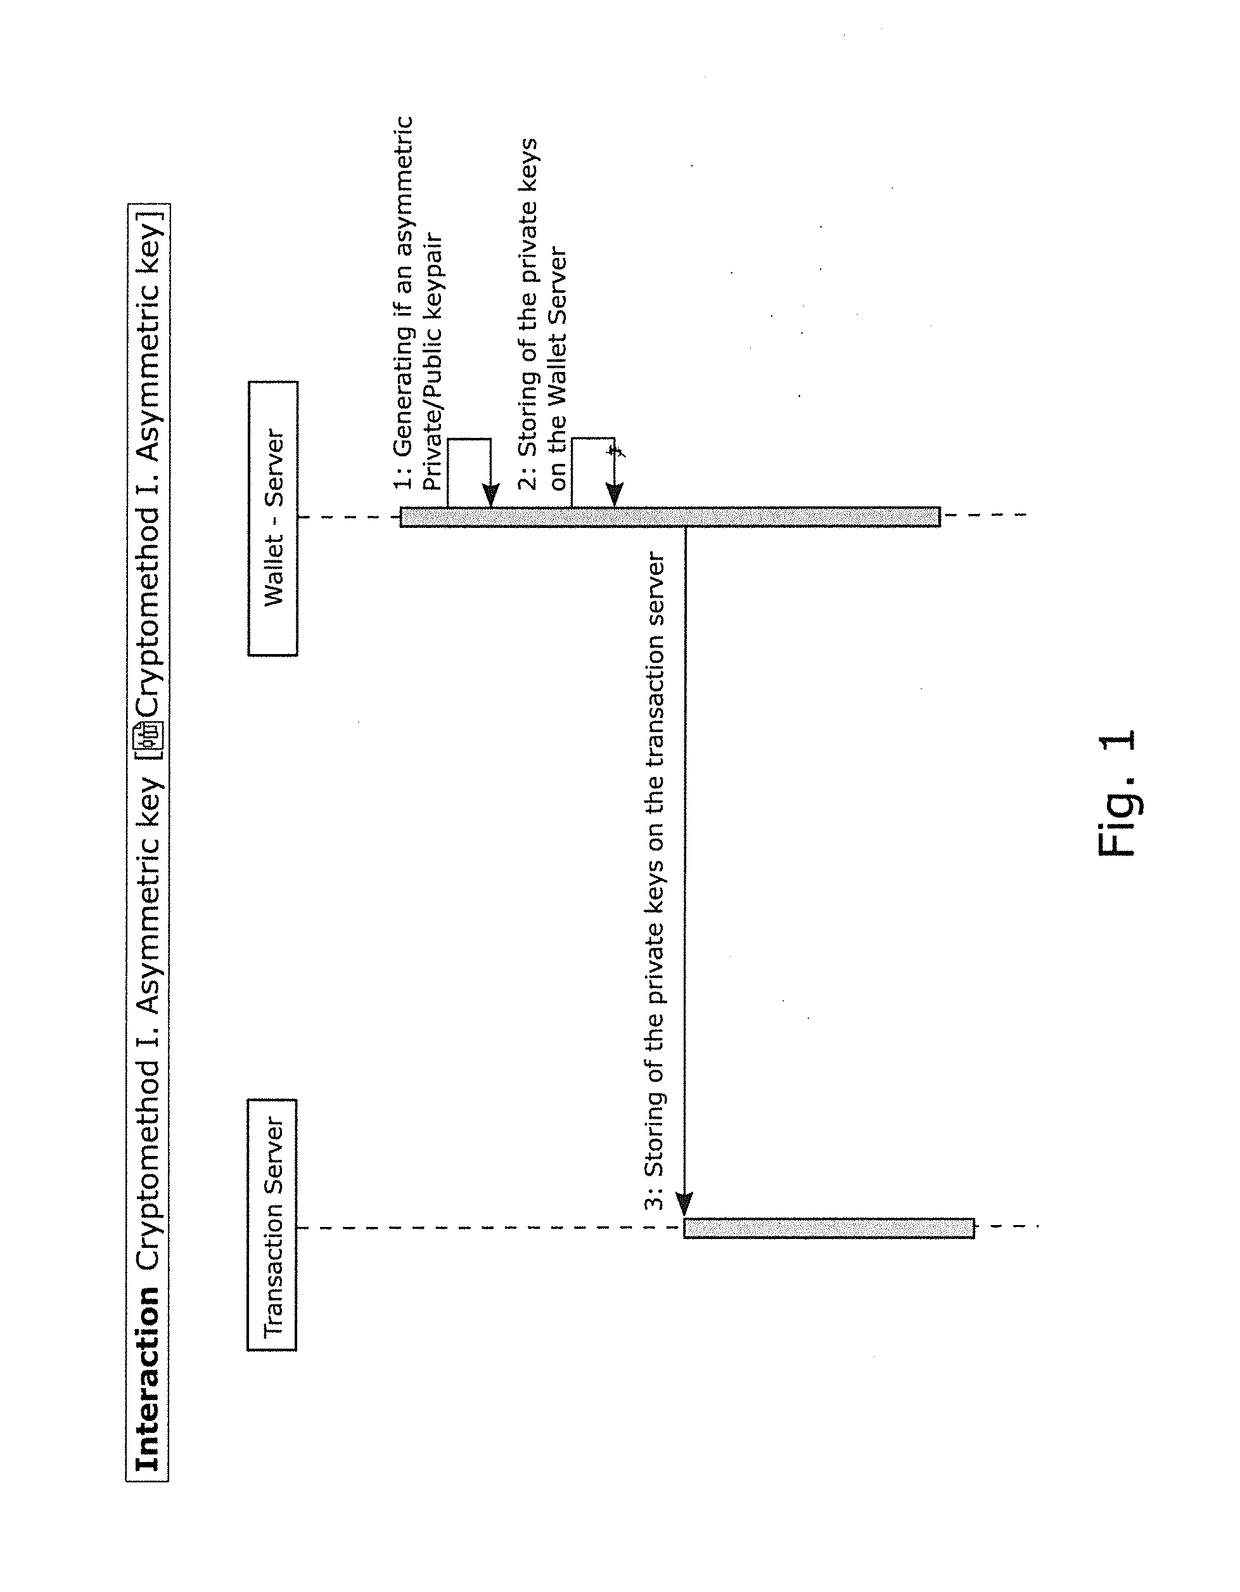 Method and device for protecting access to wallets in which crypto currencies are stored